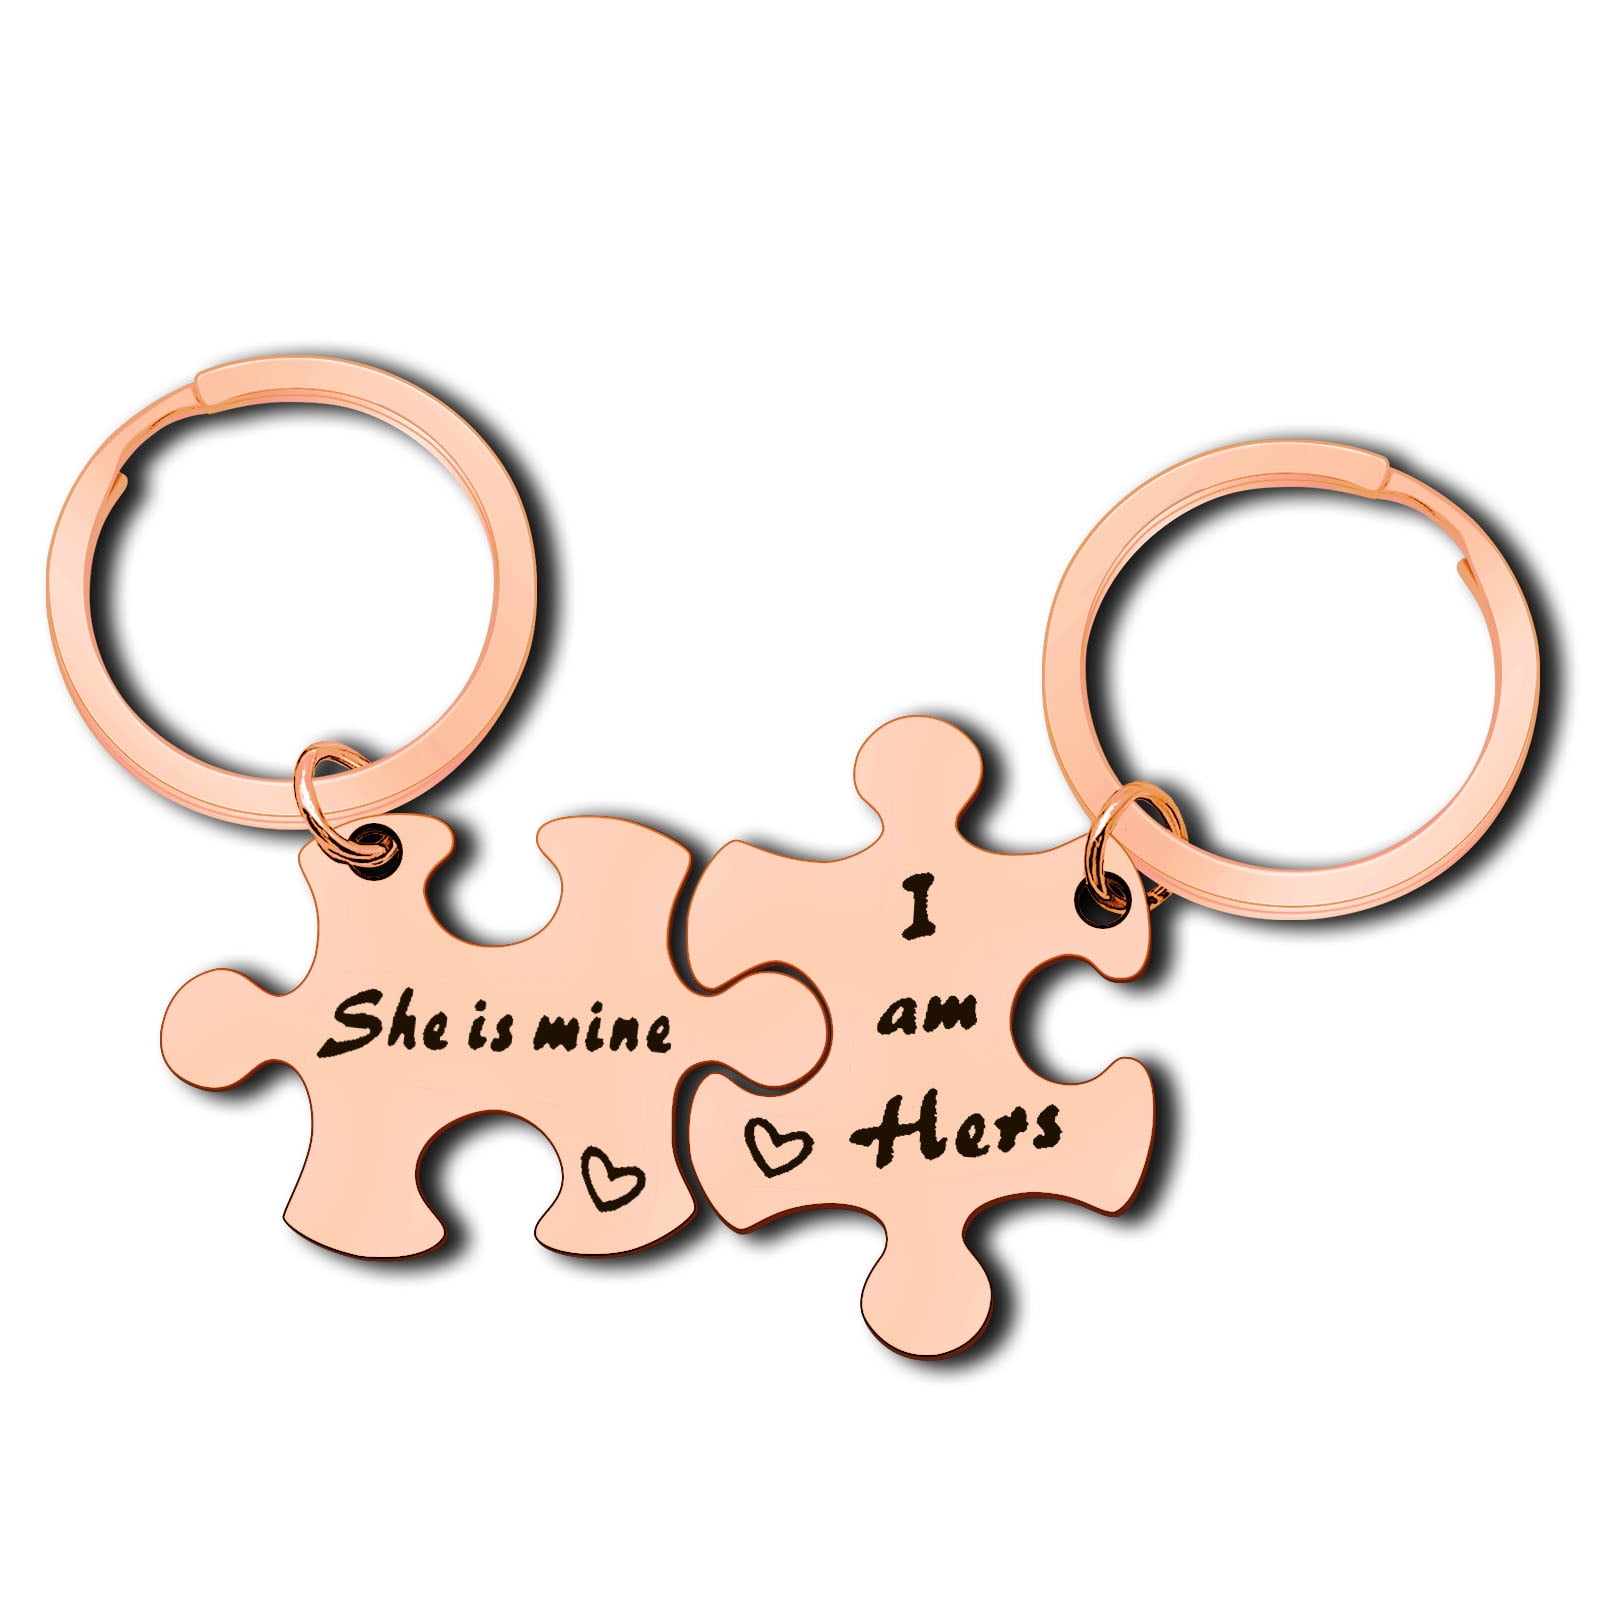 Lesbian Couples Gifts I am Hers She is Mine Puzzle Couple Keychain Set LGBT Lesbian Girlfriend Wife Wedding Gift Gay Lesbian Couples Jewelry Engagement Valentines Day Gifts LGBT Gifts for Girlfriend - image